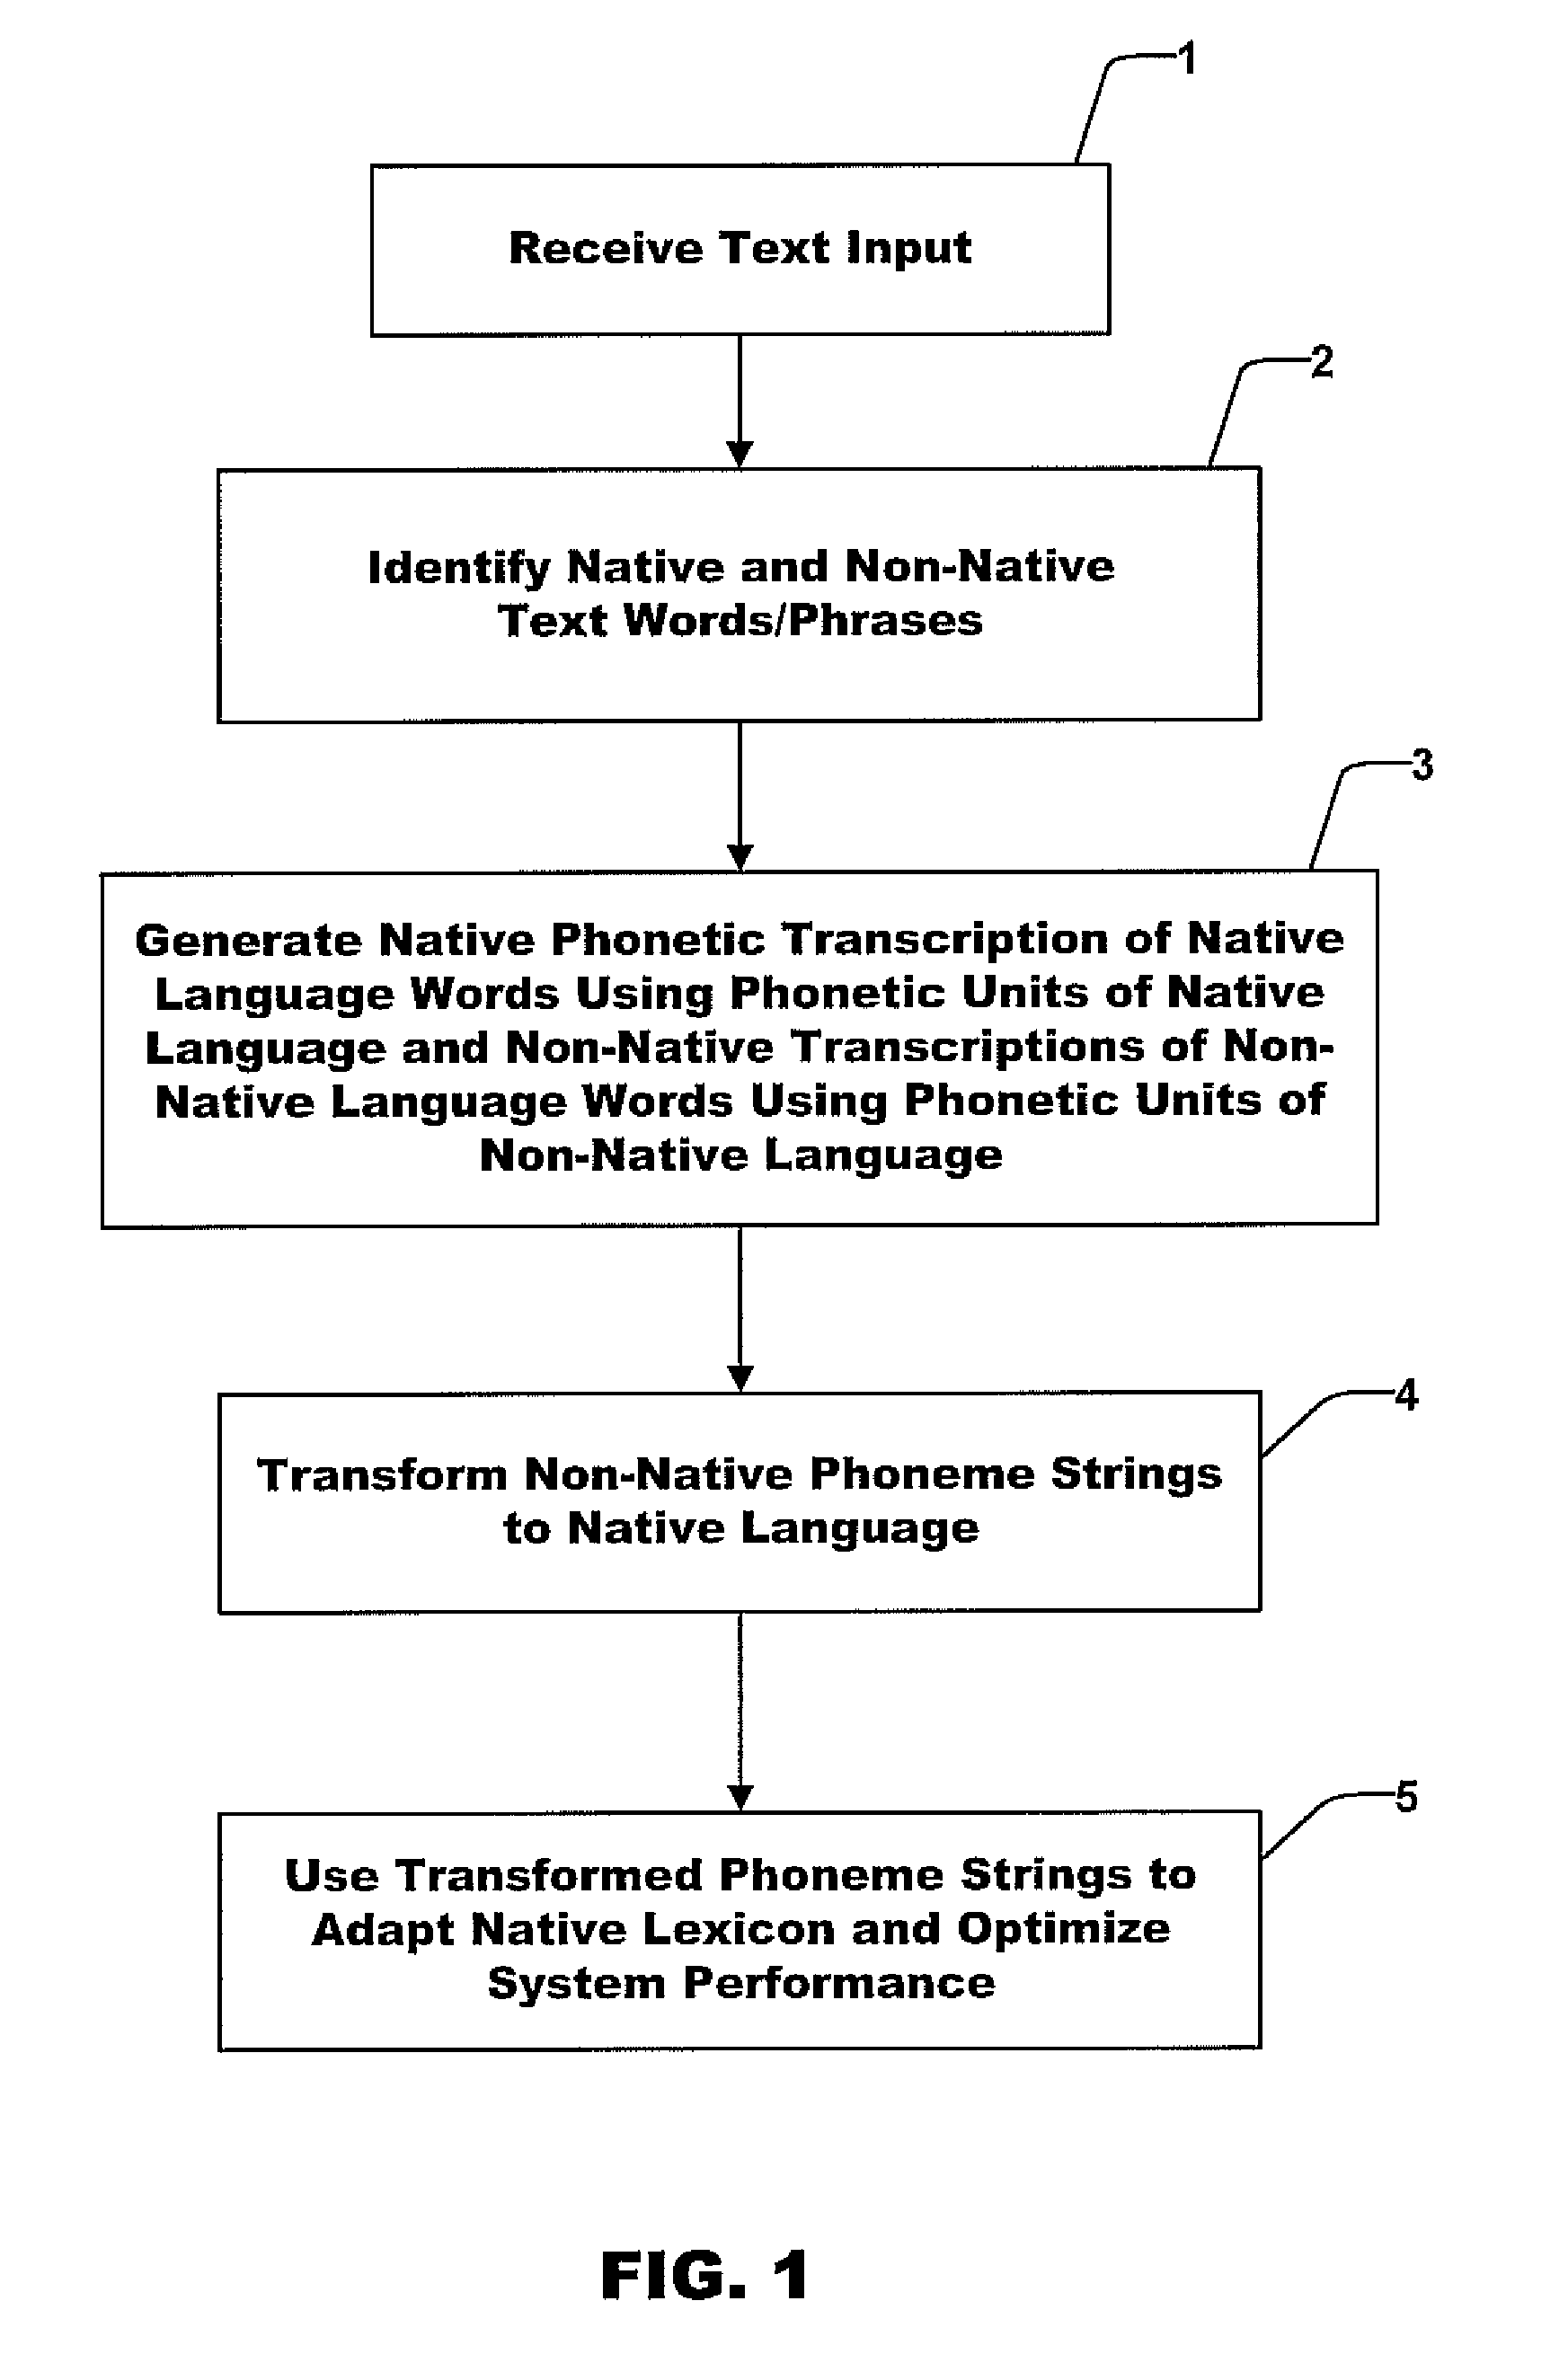 Systems and methods for building a native language phoneme lexicon having native pronunciations of non-native words derived from non-native pronunciations